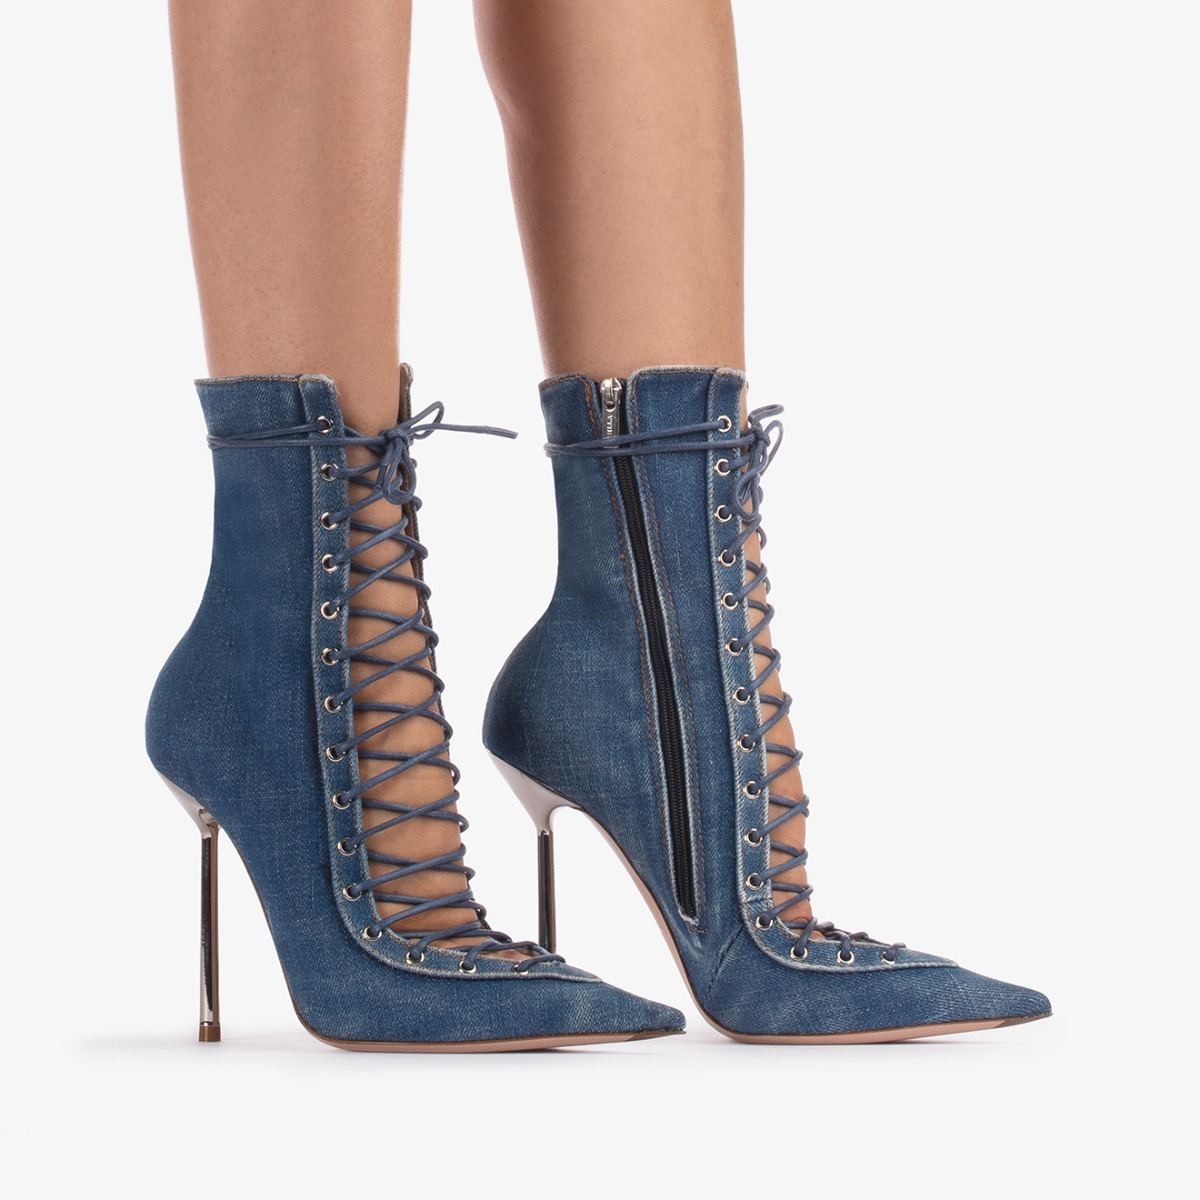 COLETTE ANKLE BOOT 120 mm - Le Silla | Official Online Store